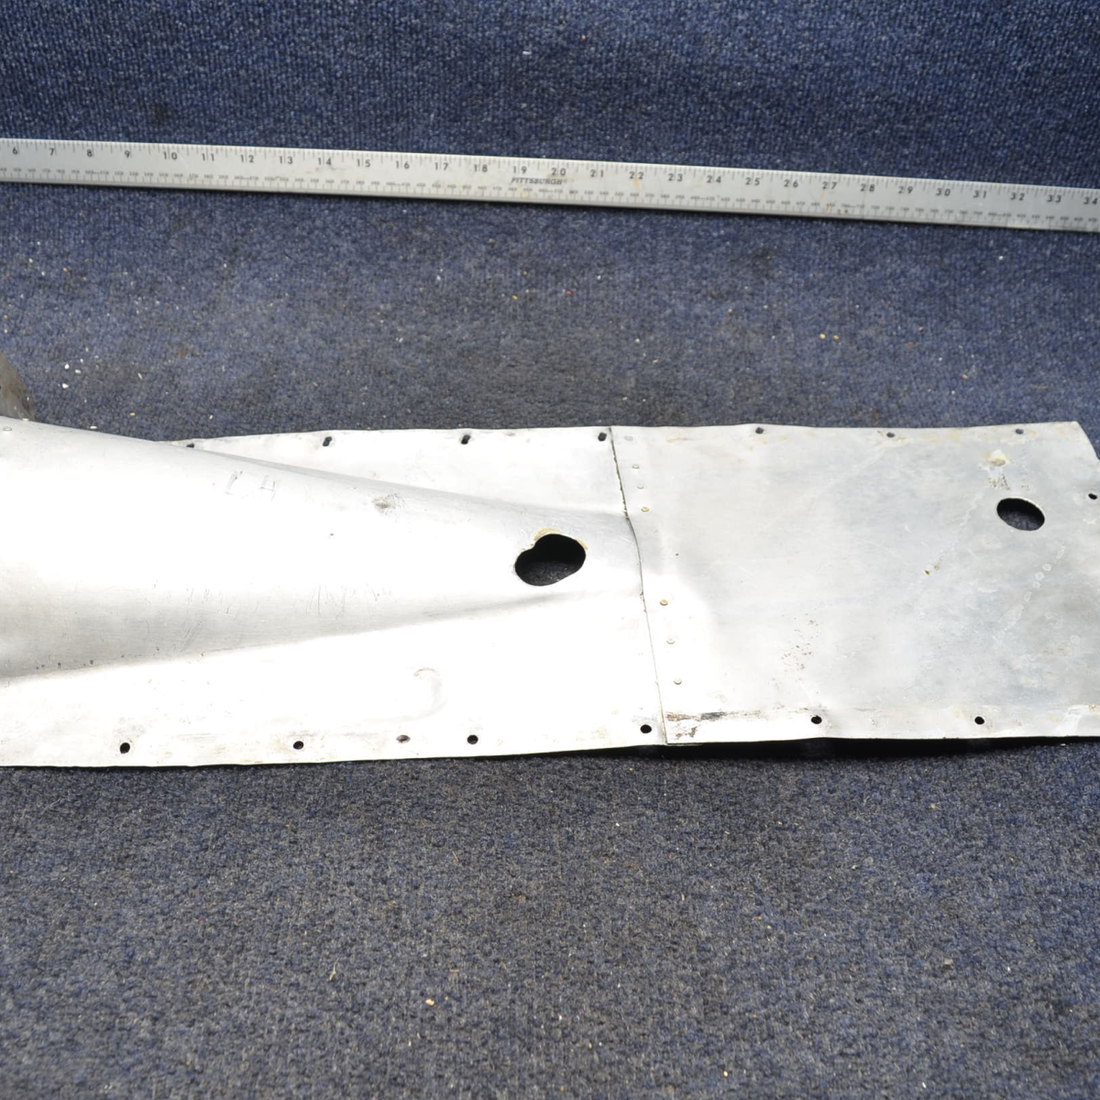 Used aircraft parts for sale, 630100-501 Mooney  [part_model] Mooney M20J EXHAUST CAVITY LH